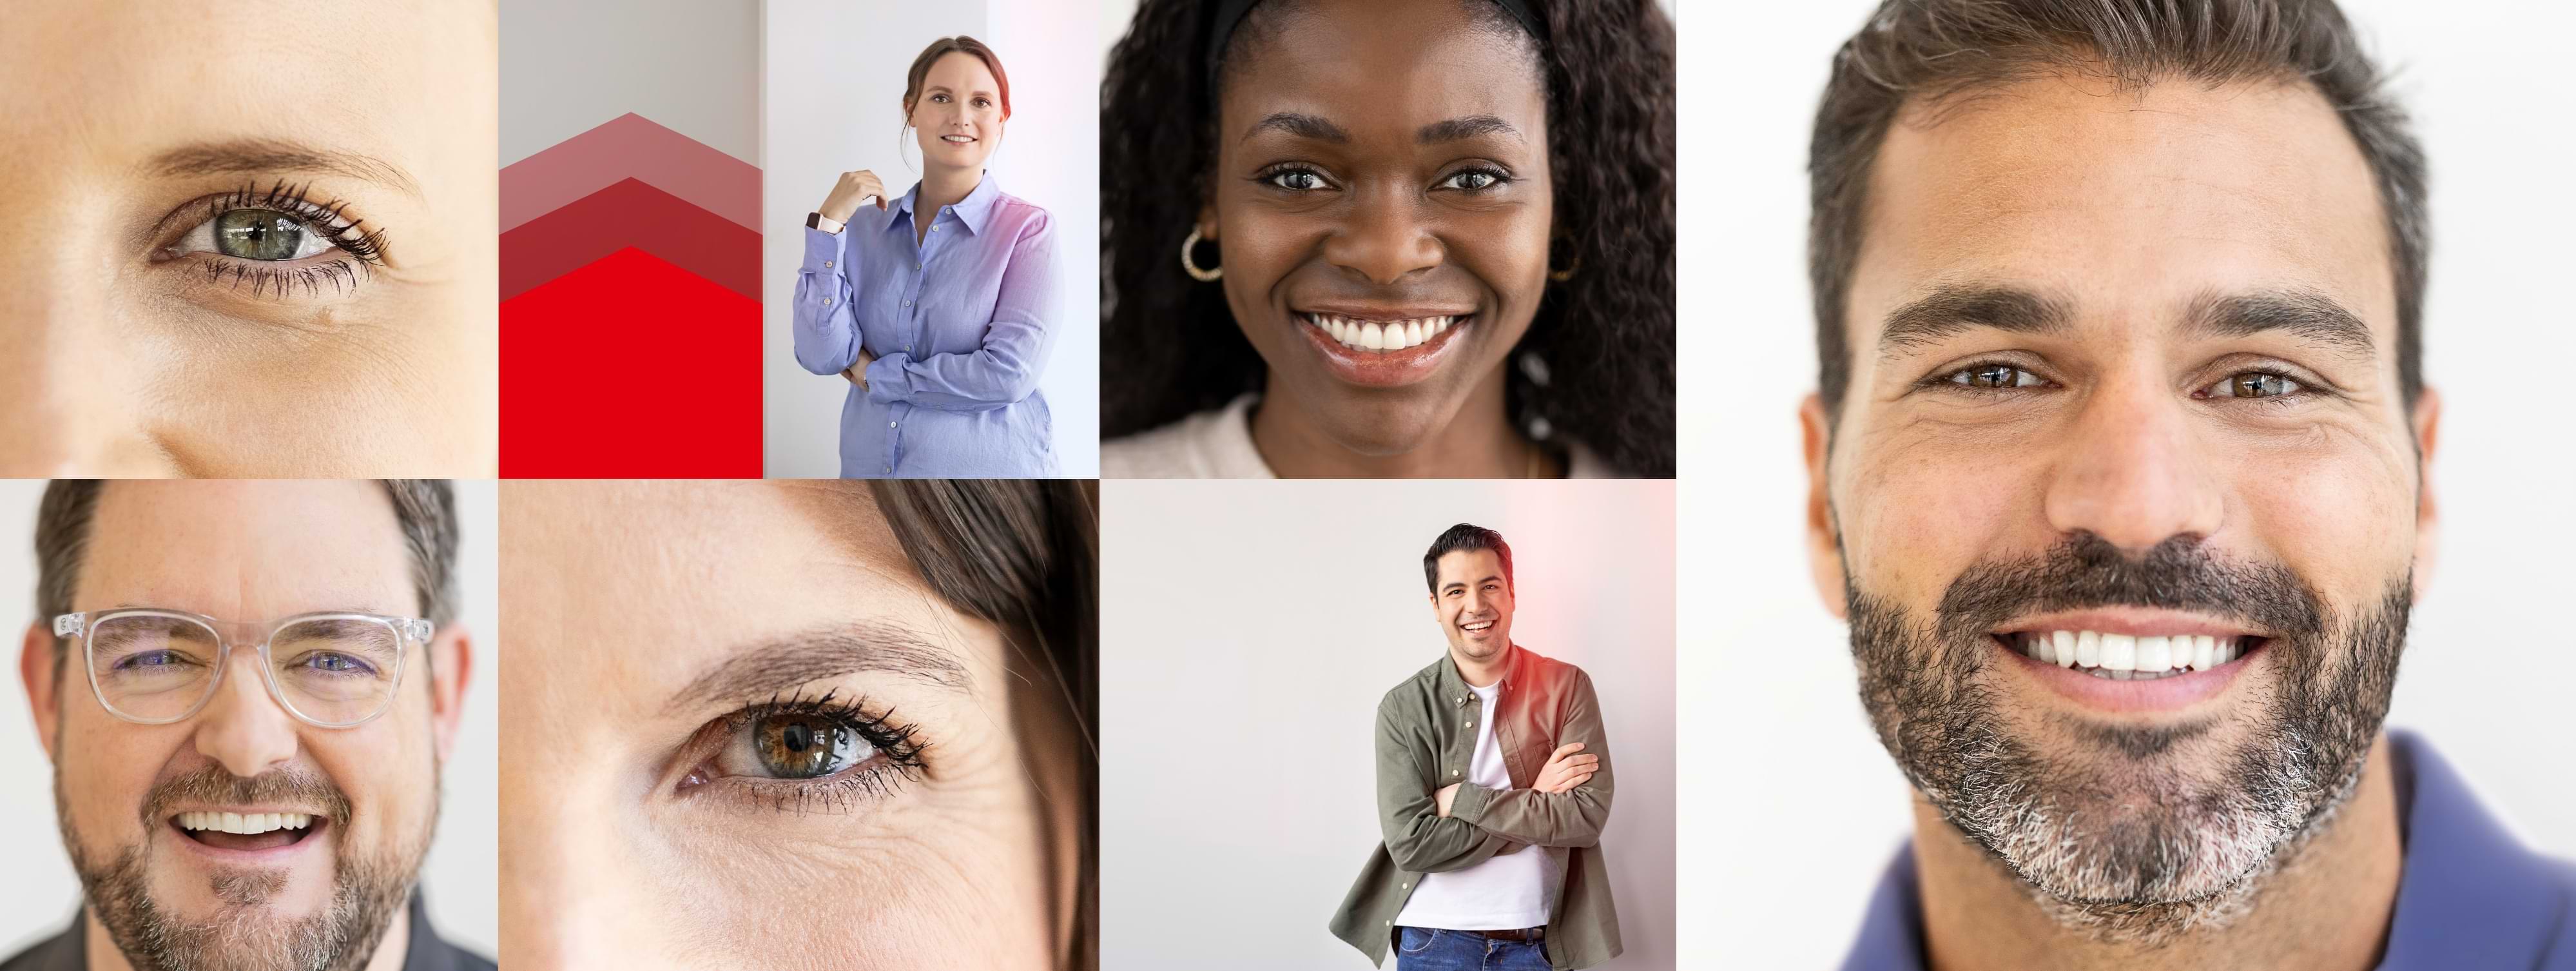 The faces of various Henkel employees. They look confidently and smile.